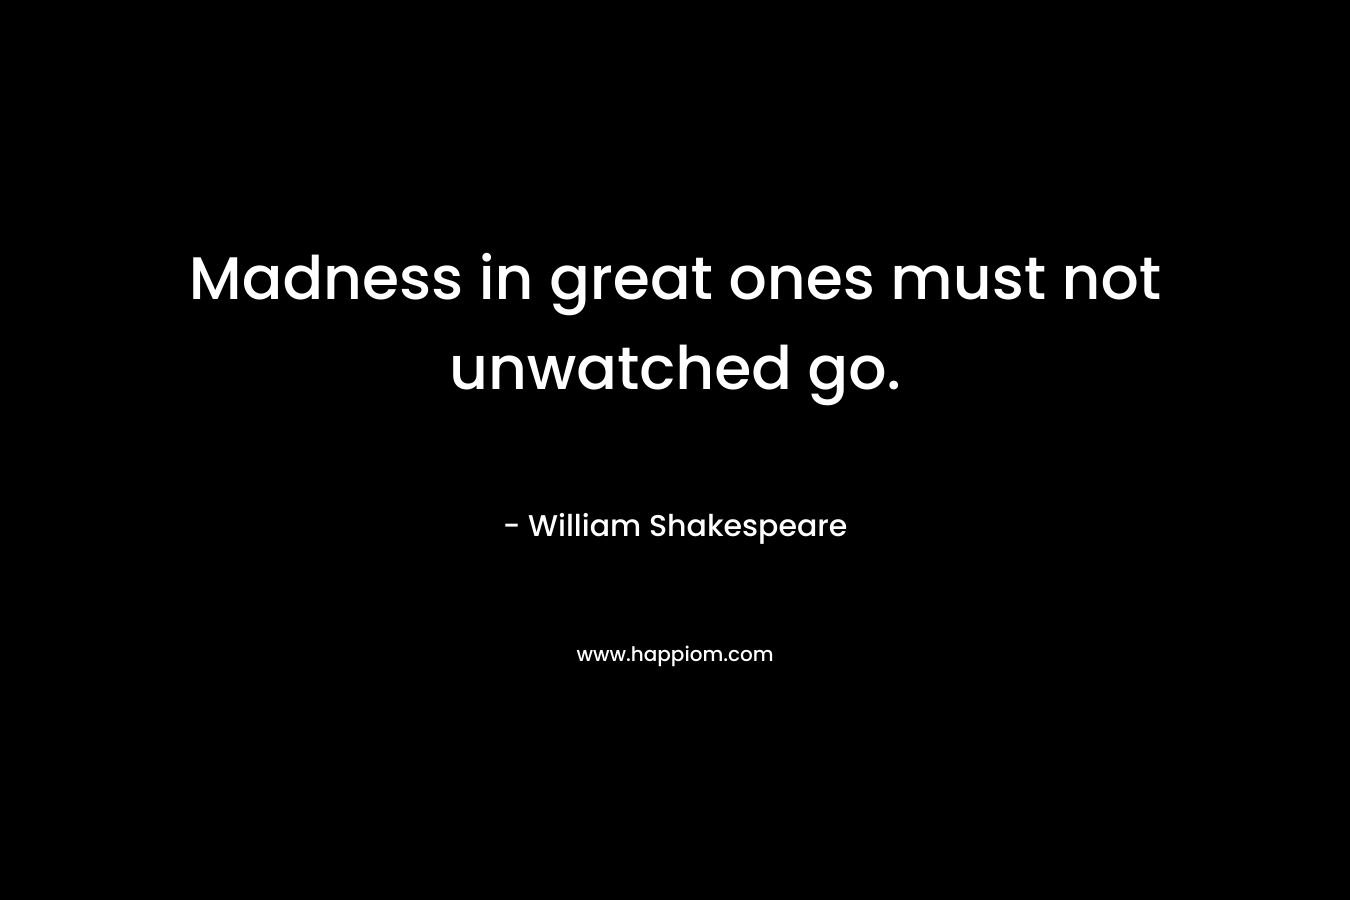 Madness in great ones must not unwatched go.